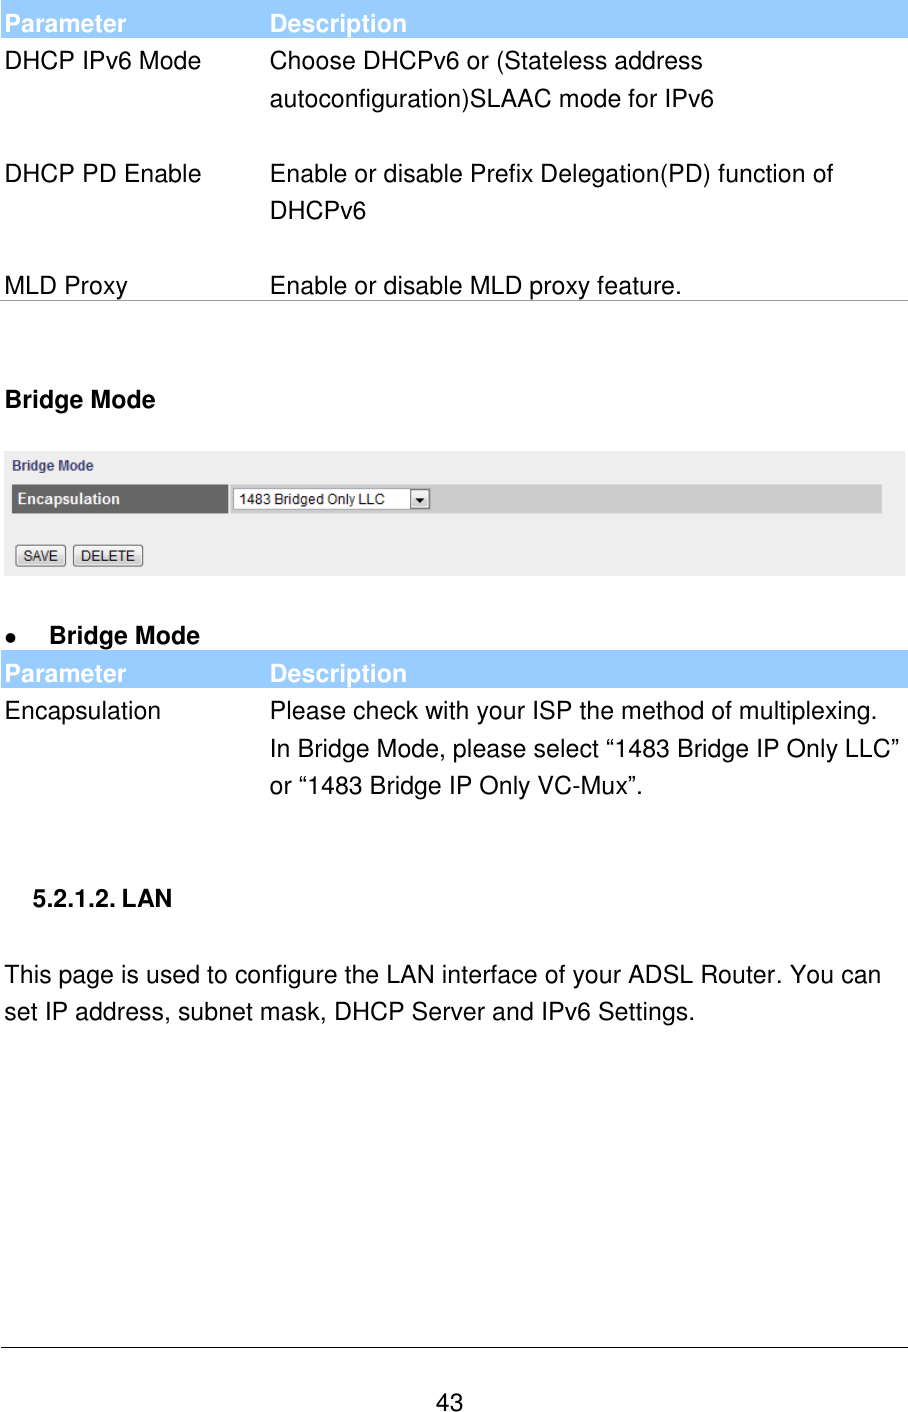   43 Parameter Description DHCP IPv6 Mode Choose DHCPv6 or (Stateless address autoconfiguration)SLAAC mode for IPv6   DHCP PD Enable Enable or disable Prefix Delegation(PD) function of DHCPv6   MLD Proxy Enable or disable MLD proxy feature.   Bridge Mode      Bridge Mode Parameter Description Encapsulation Please check with your ISP the method of multiplexing. In Bridge Mode, please select “1483 Bridge IP Only LLC” or “1483 Bridge IP Only VC-Mux”.    5.2.1.2. LAN  This page is used to configure the LAN interface of your ADSL Router. You can set IP address, subnet mask, DHCP Server and IPv6 Settings.  